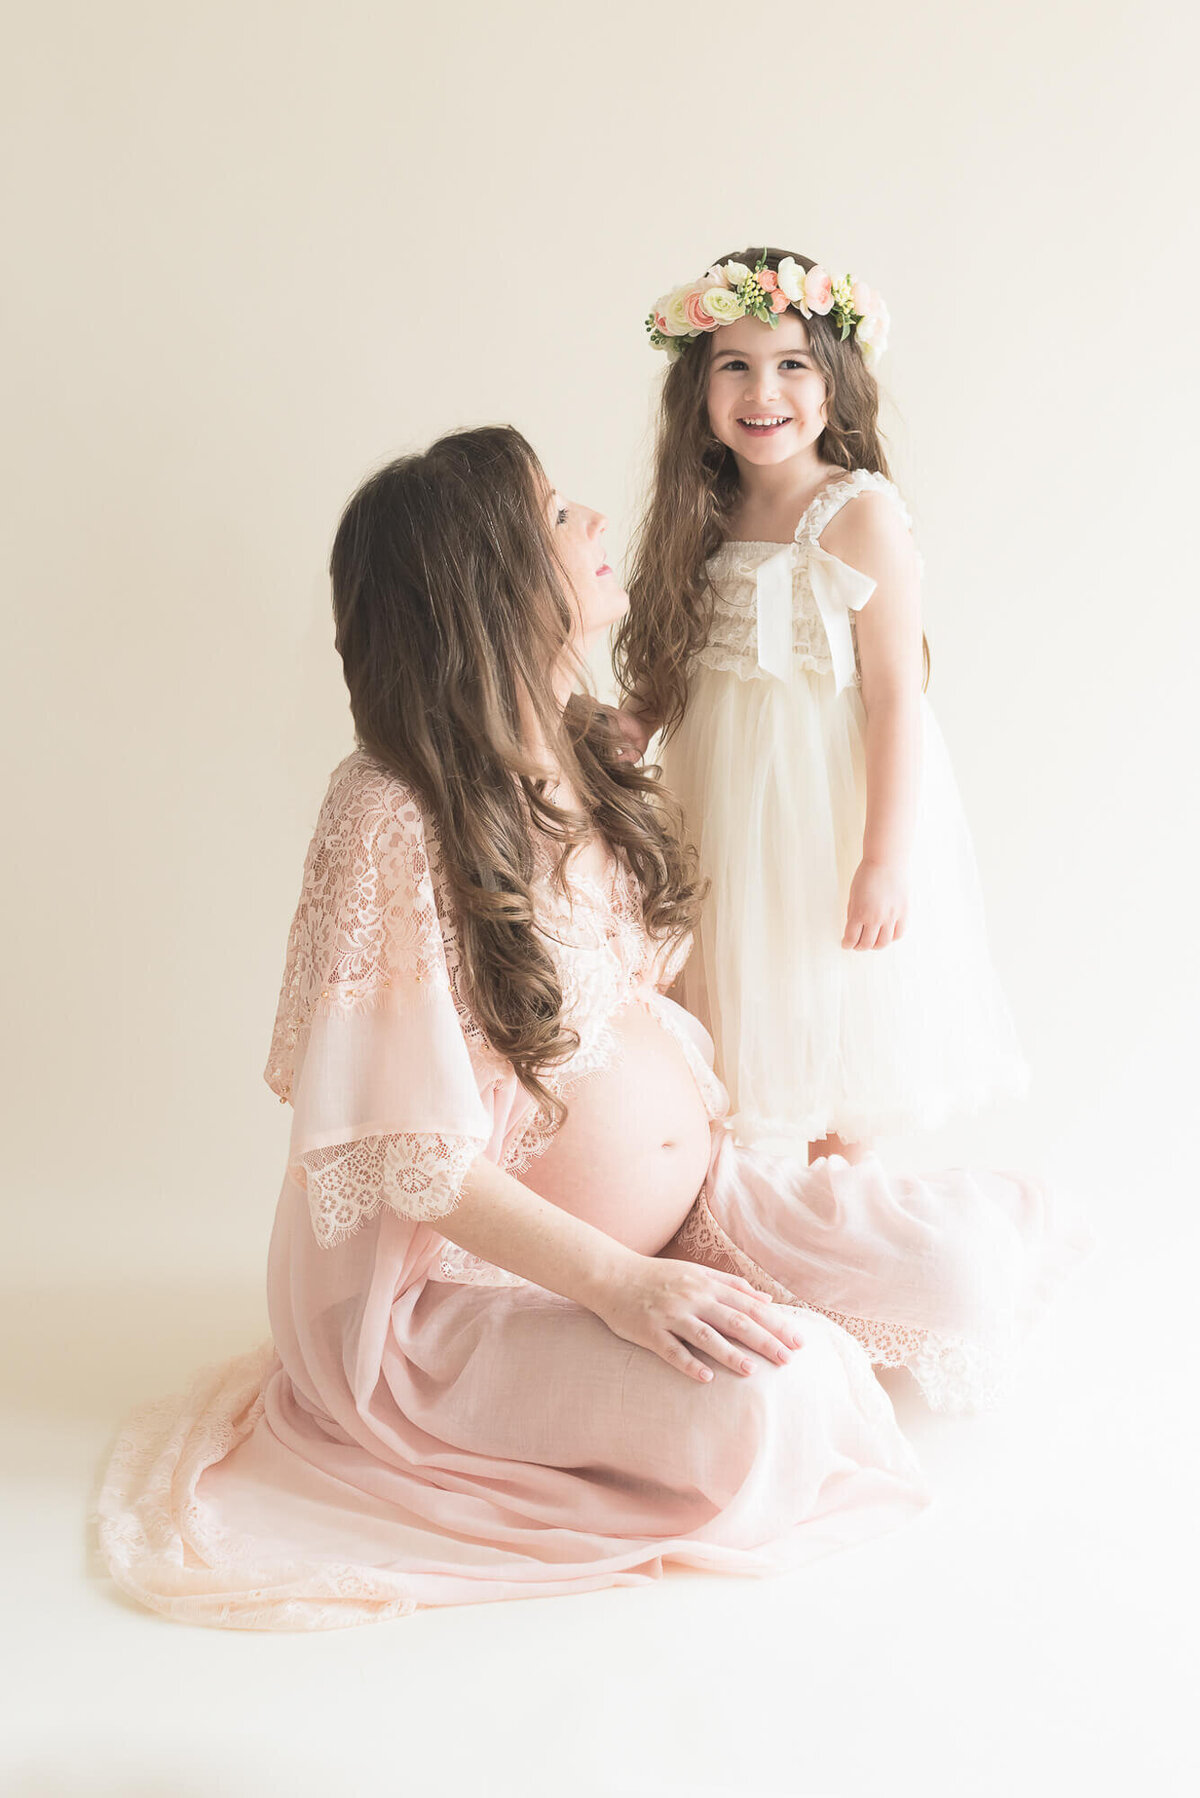 studio portrait mommy and me maternity session light and airy soft blush and cream  on cream studio backdrop captured by Allison Amores Photography